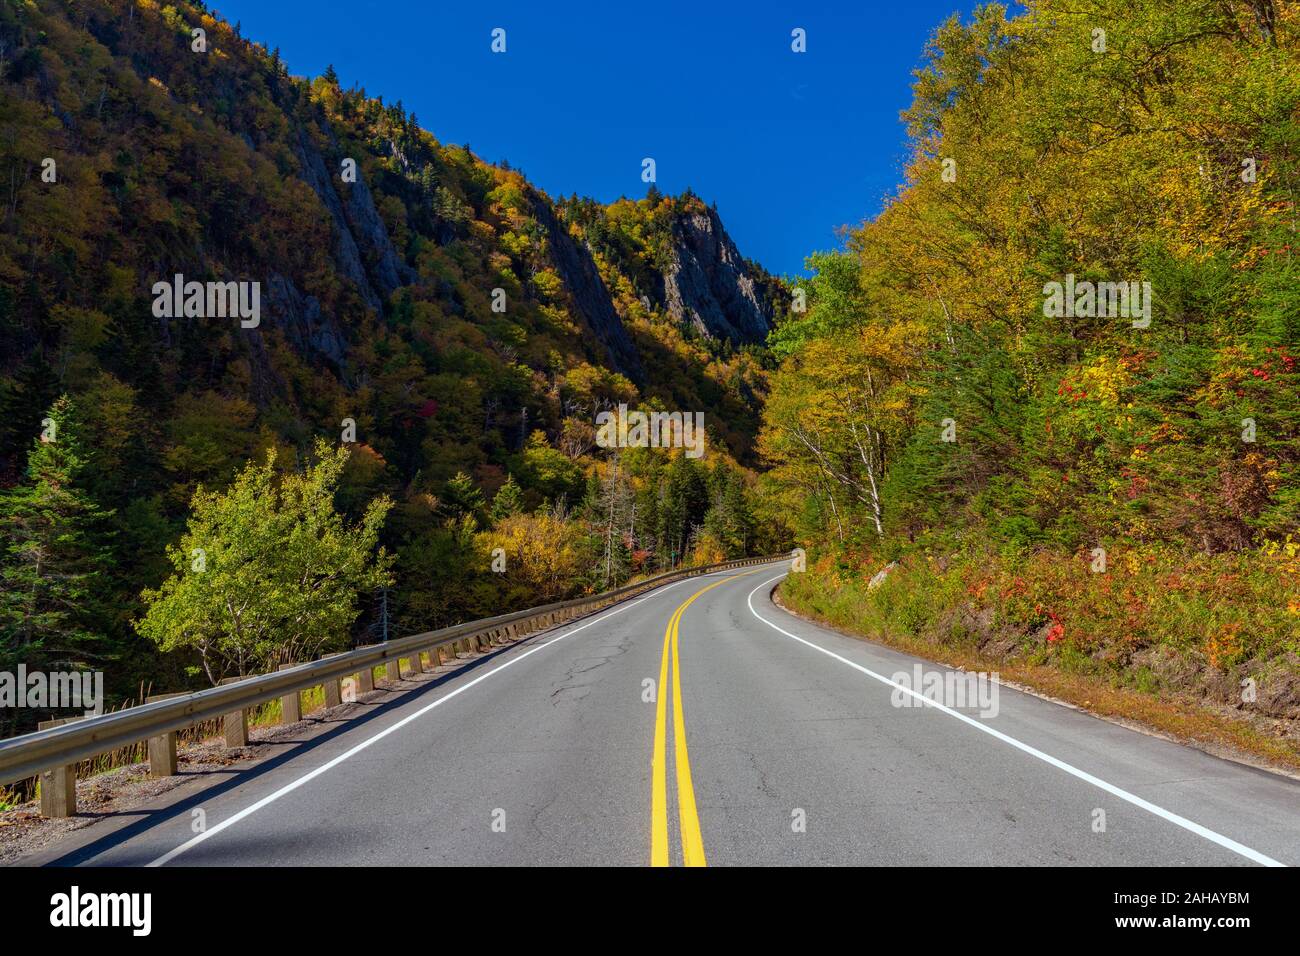 A bend in the road leads through a mountain pass surrounded by  colorful forest displaying vibrant mountain colors. Stock Photo